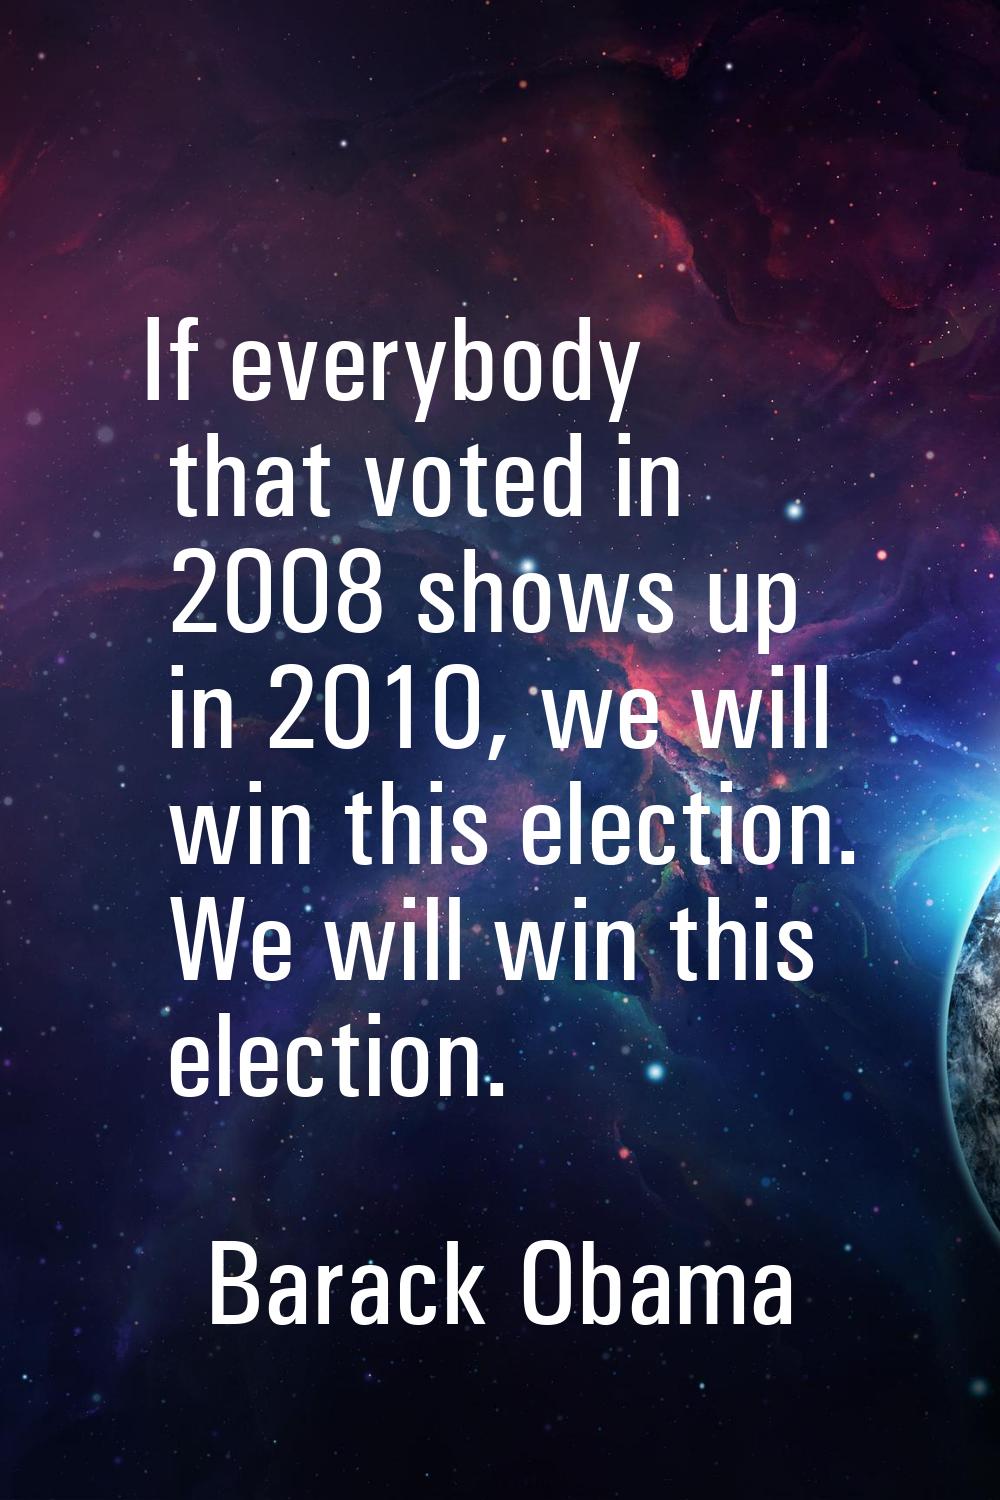 If everybody that voted in 2008 shows up in 2010, we will win this election. We will win this elect